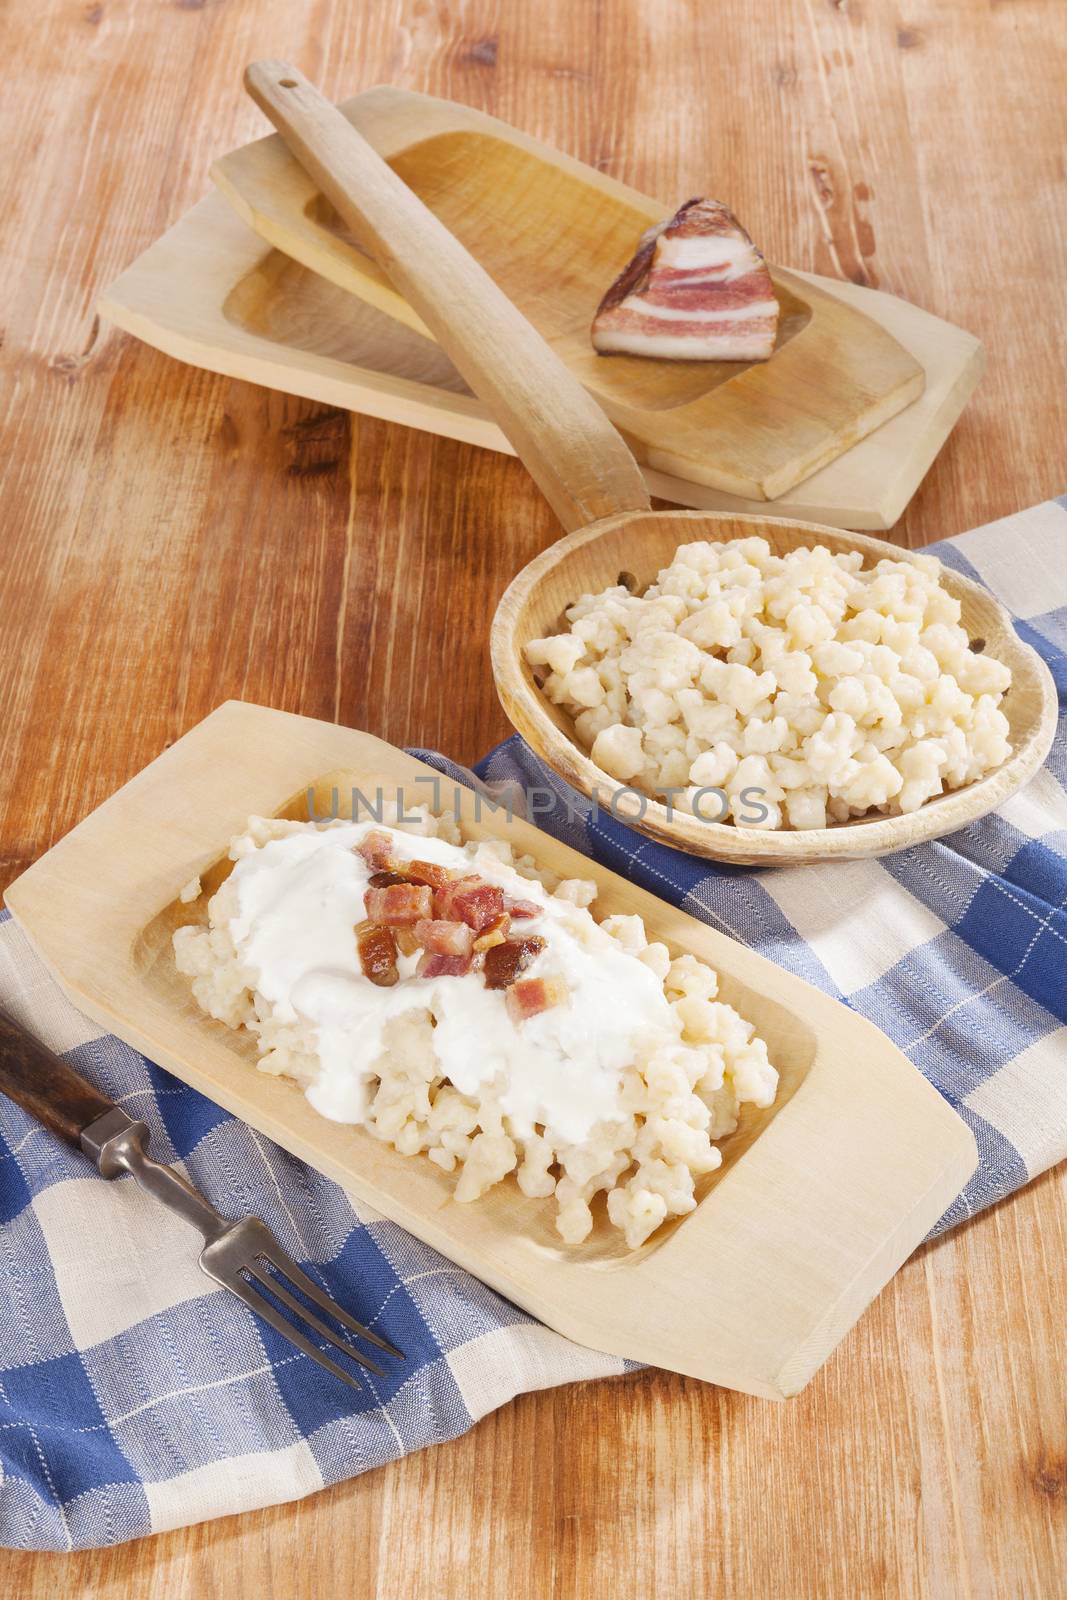 Bryndzove halusky. Potato dumplings with bryndza sheep cheese and bacon on wooden background. Bryndzove halusky, traditional national slovak food, country style.